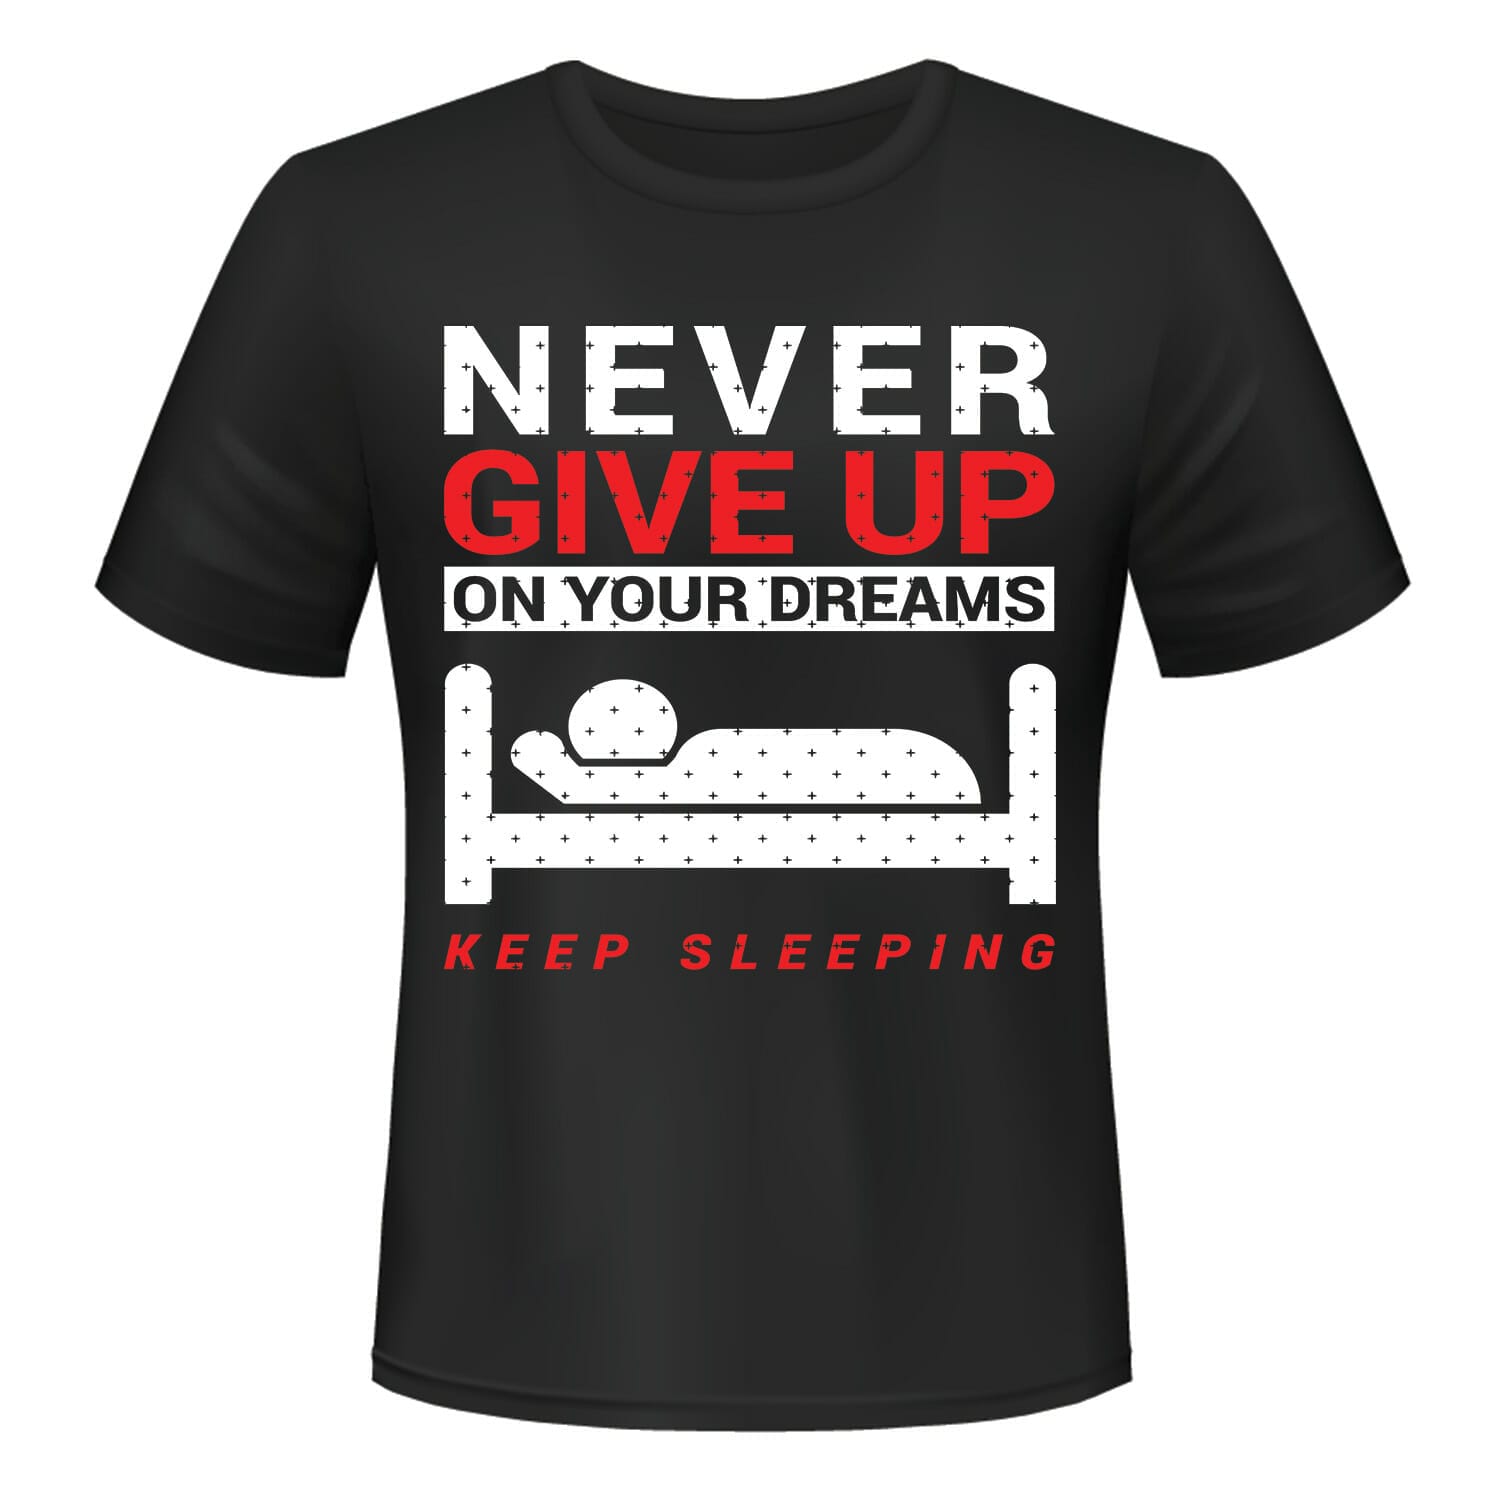 Never Give Up on your dreams keep sleeping funny Tshirt Design